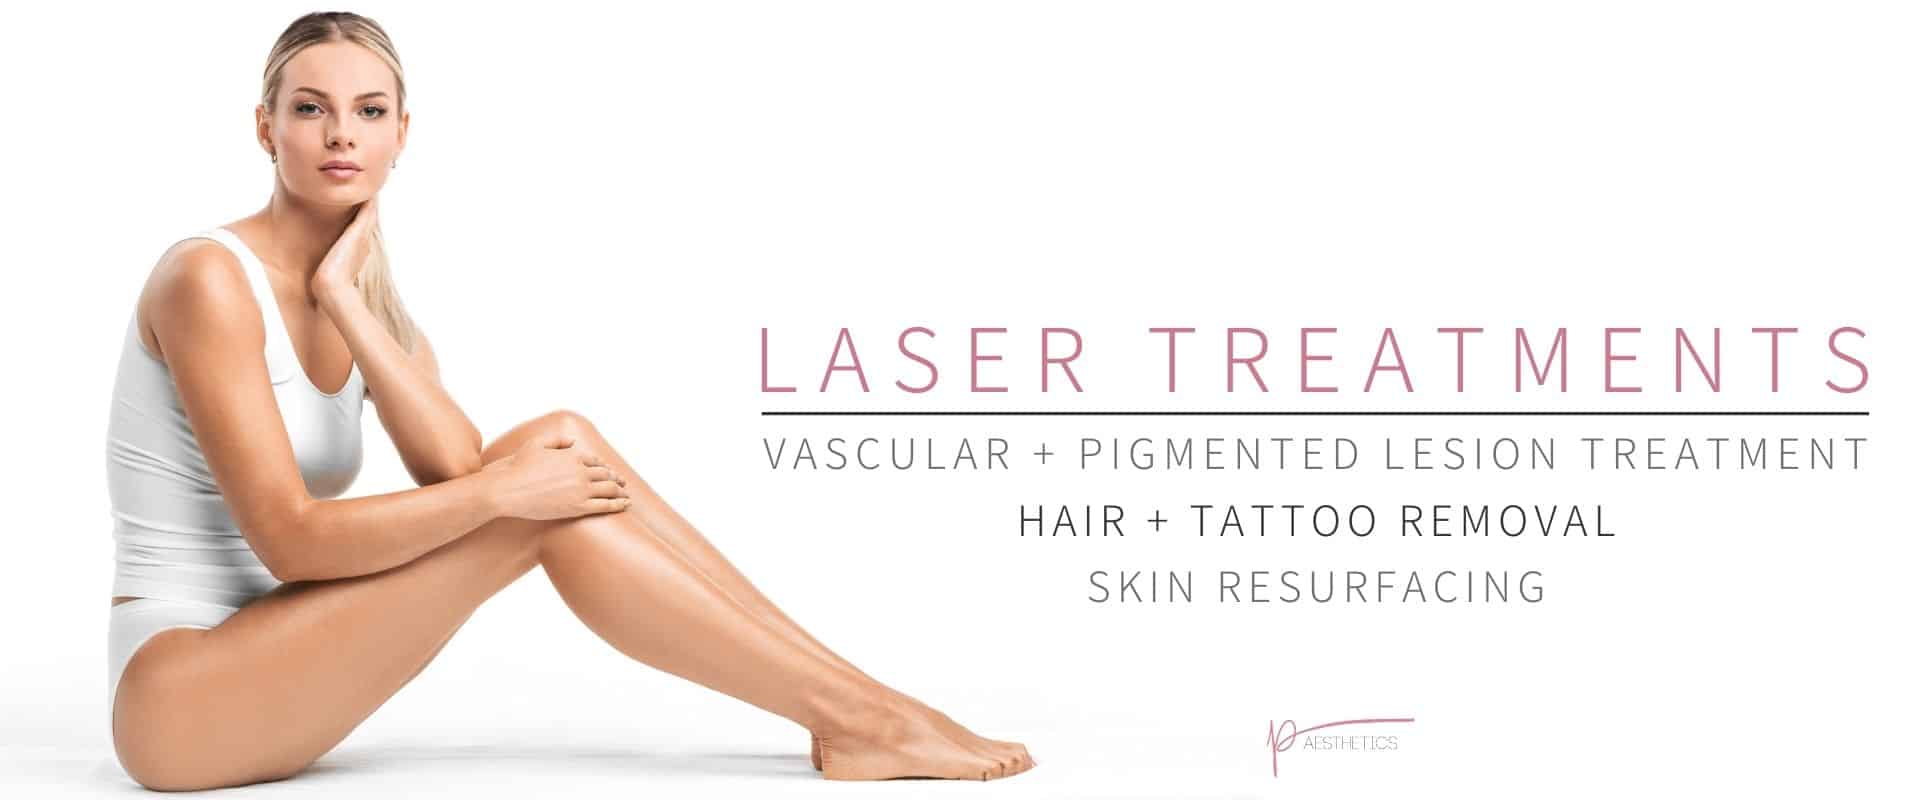 Woman with smooth legs after laser treatment at KP Aesthetics.